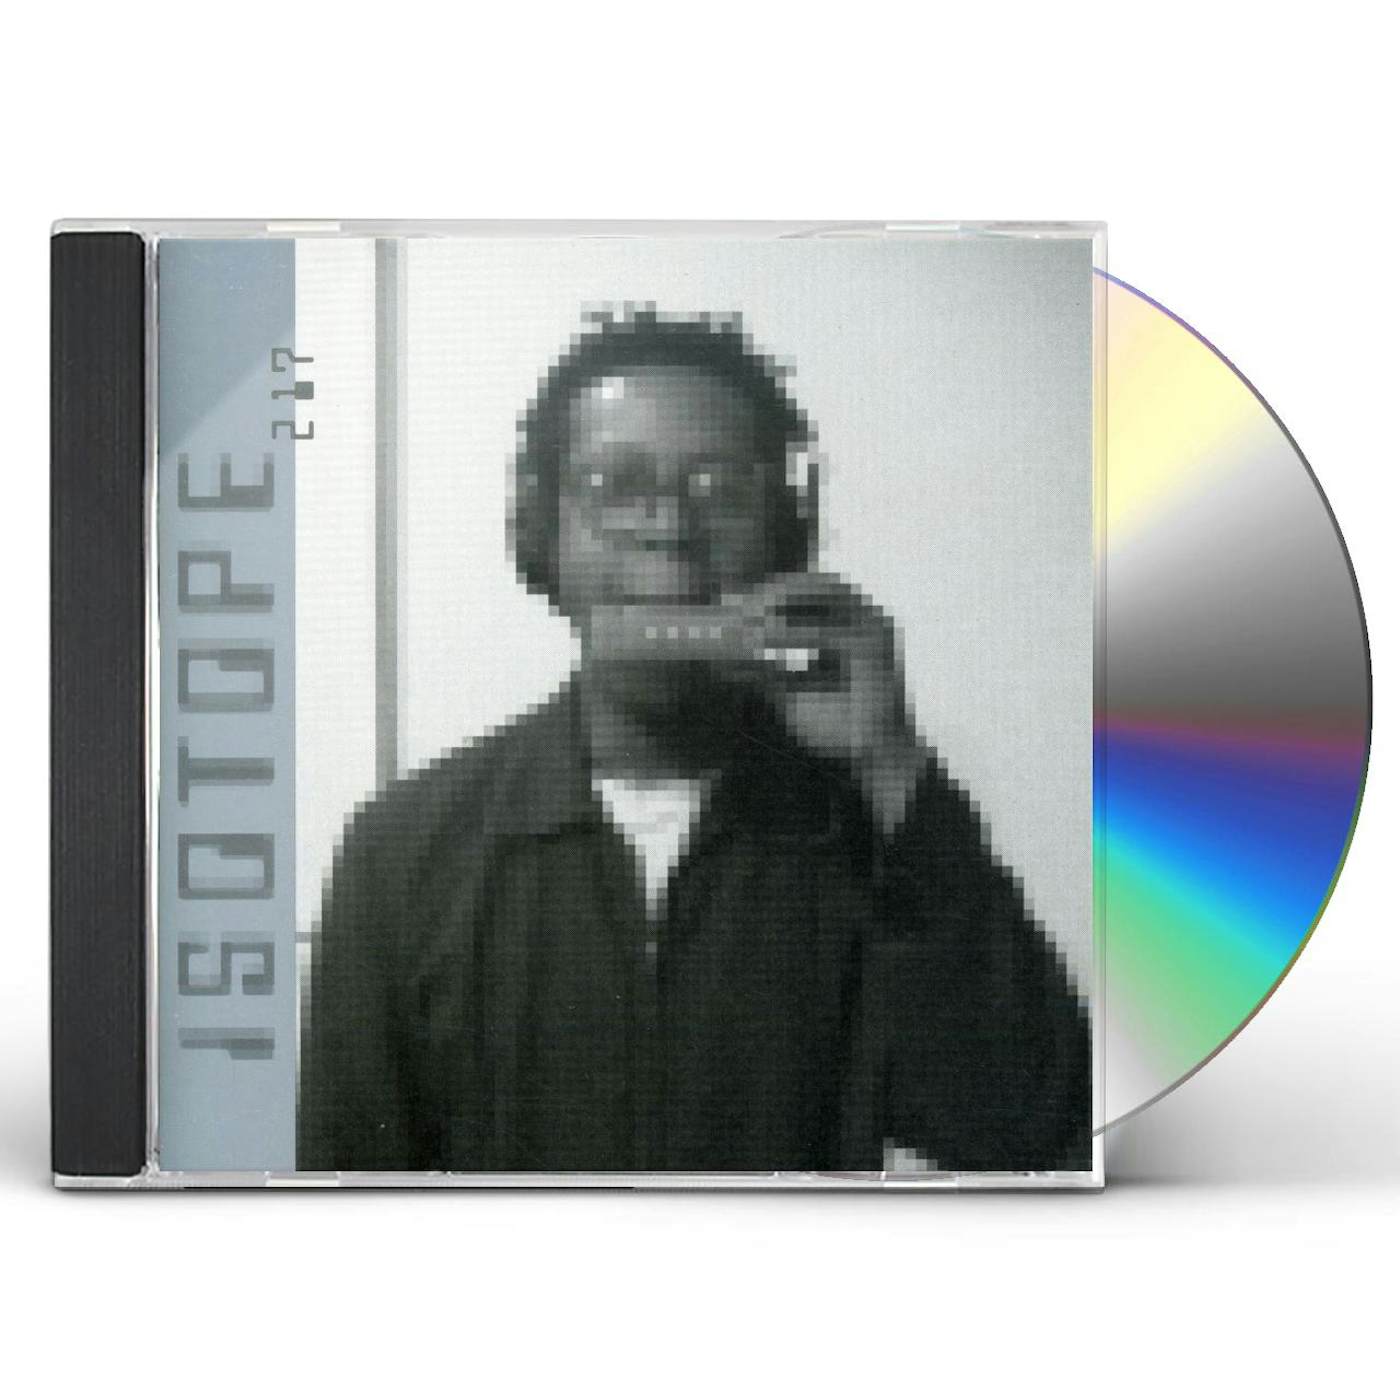 Isotope 217 WHO STOLE THE I WALKMAN CD